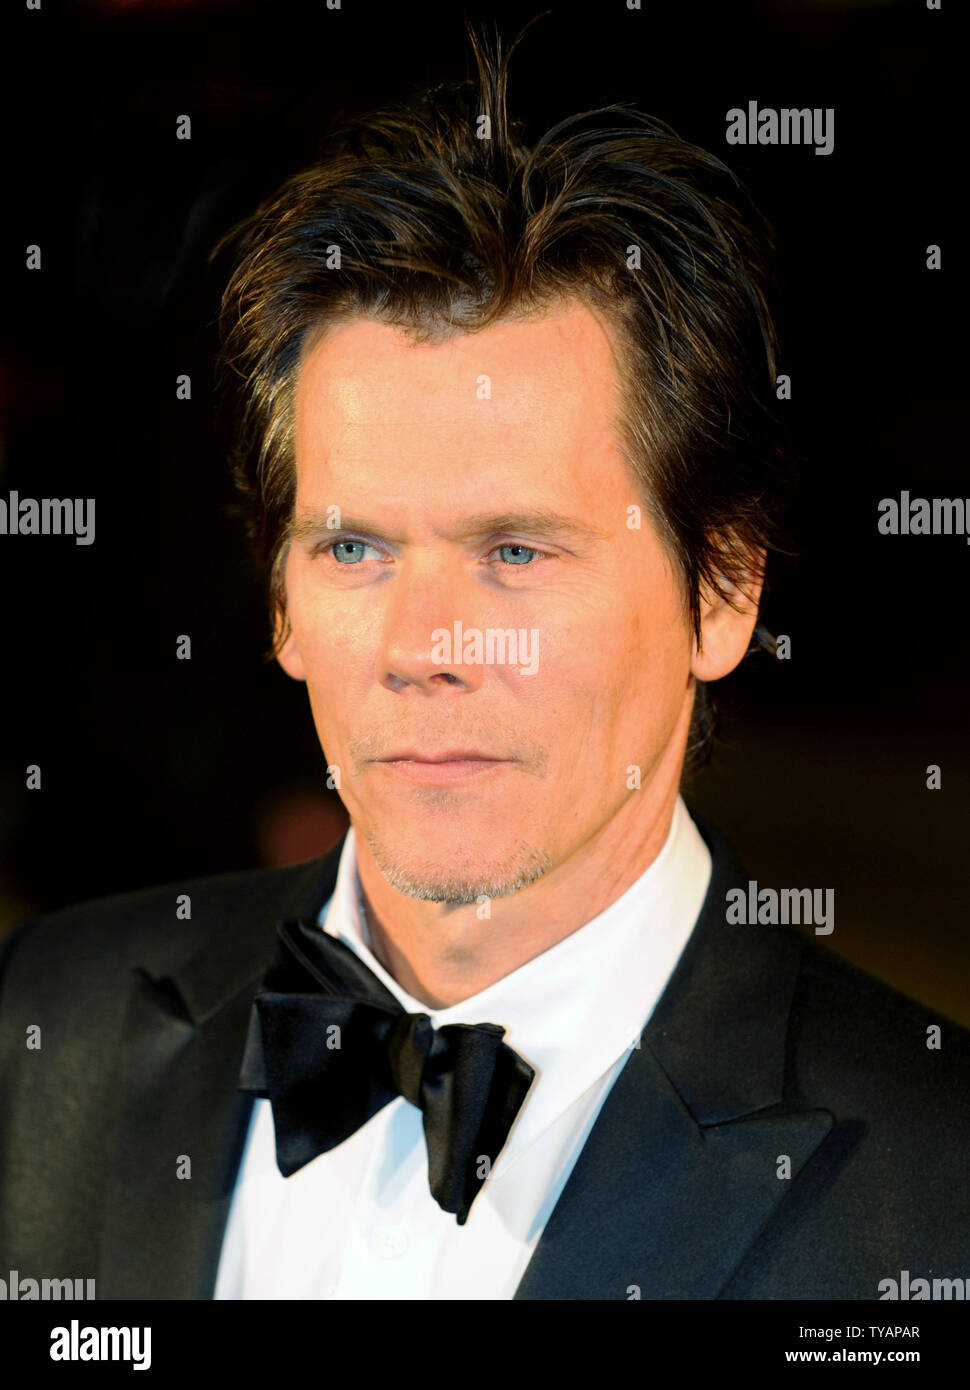 American actor Kevin Bacon attends the premiere of "Frost/Nixon" at The Times BFI London Film Festival at Odeon, Leicester Square in London on October 15, 2008.  (UPI Photo/Rune Hellestad) Stock Photo